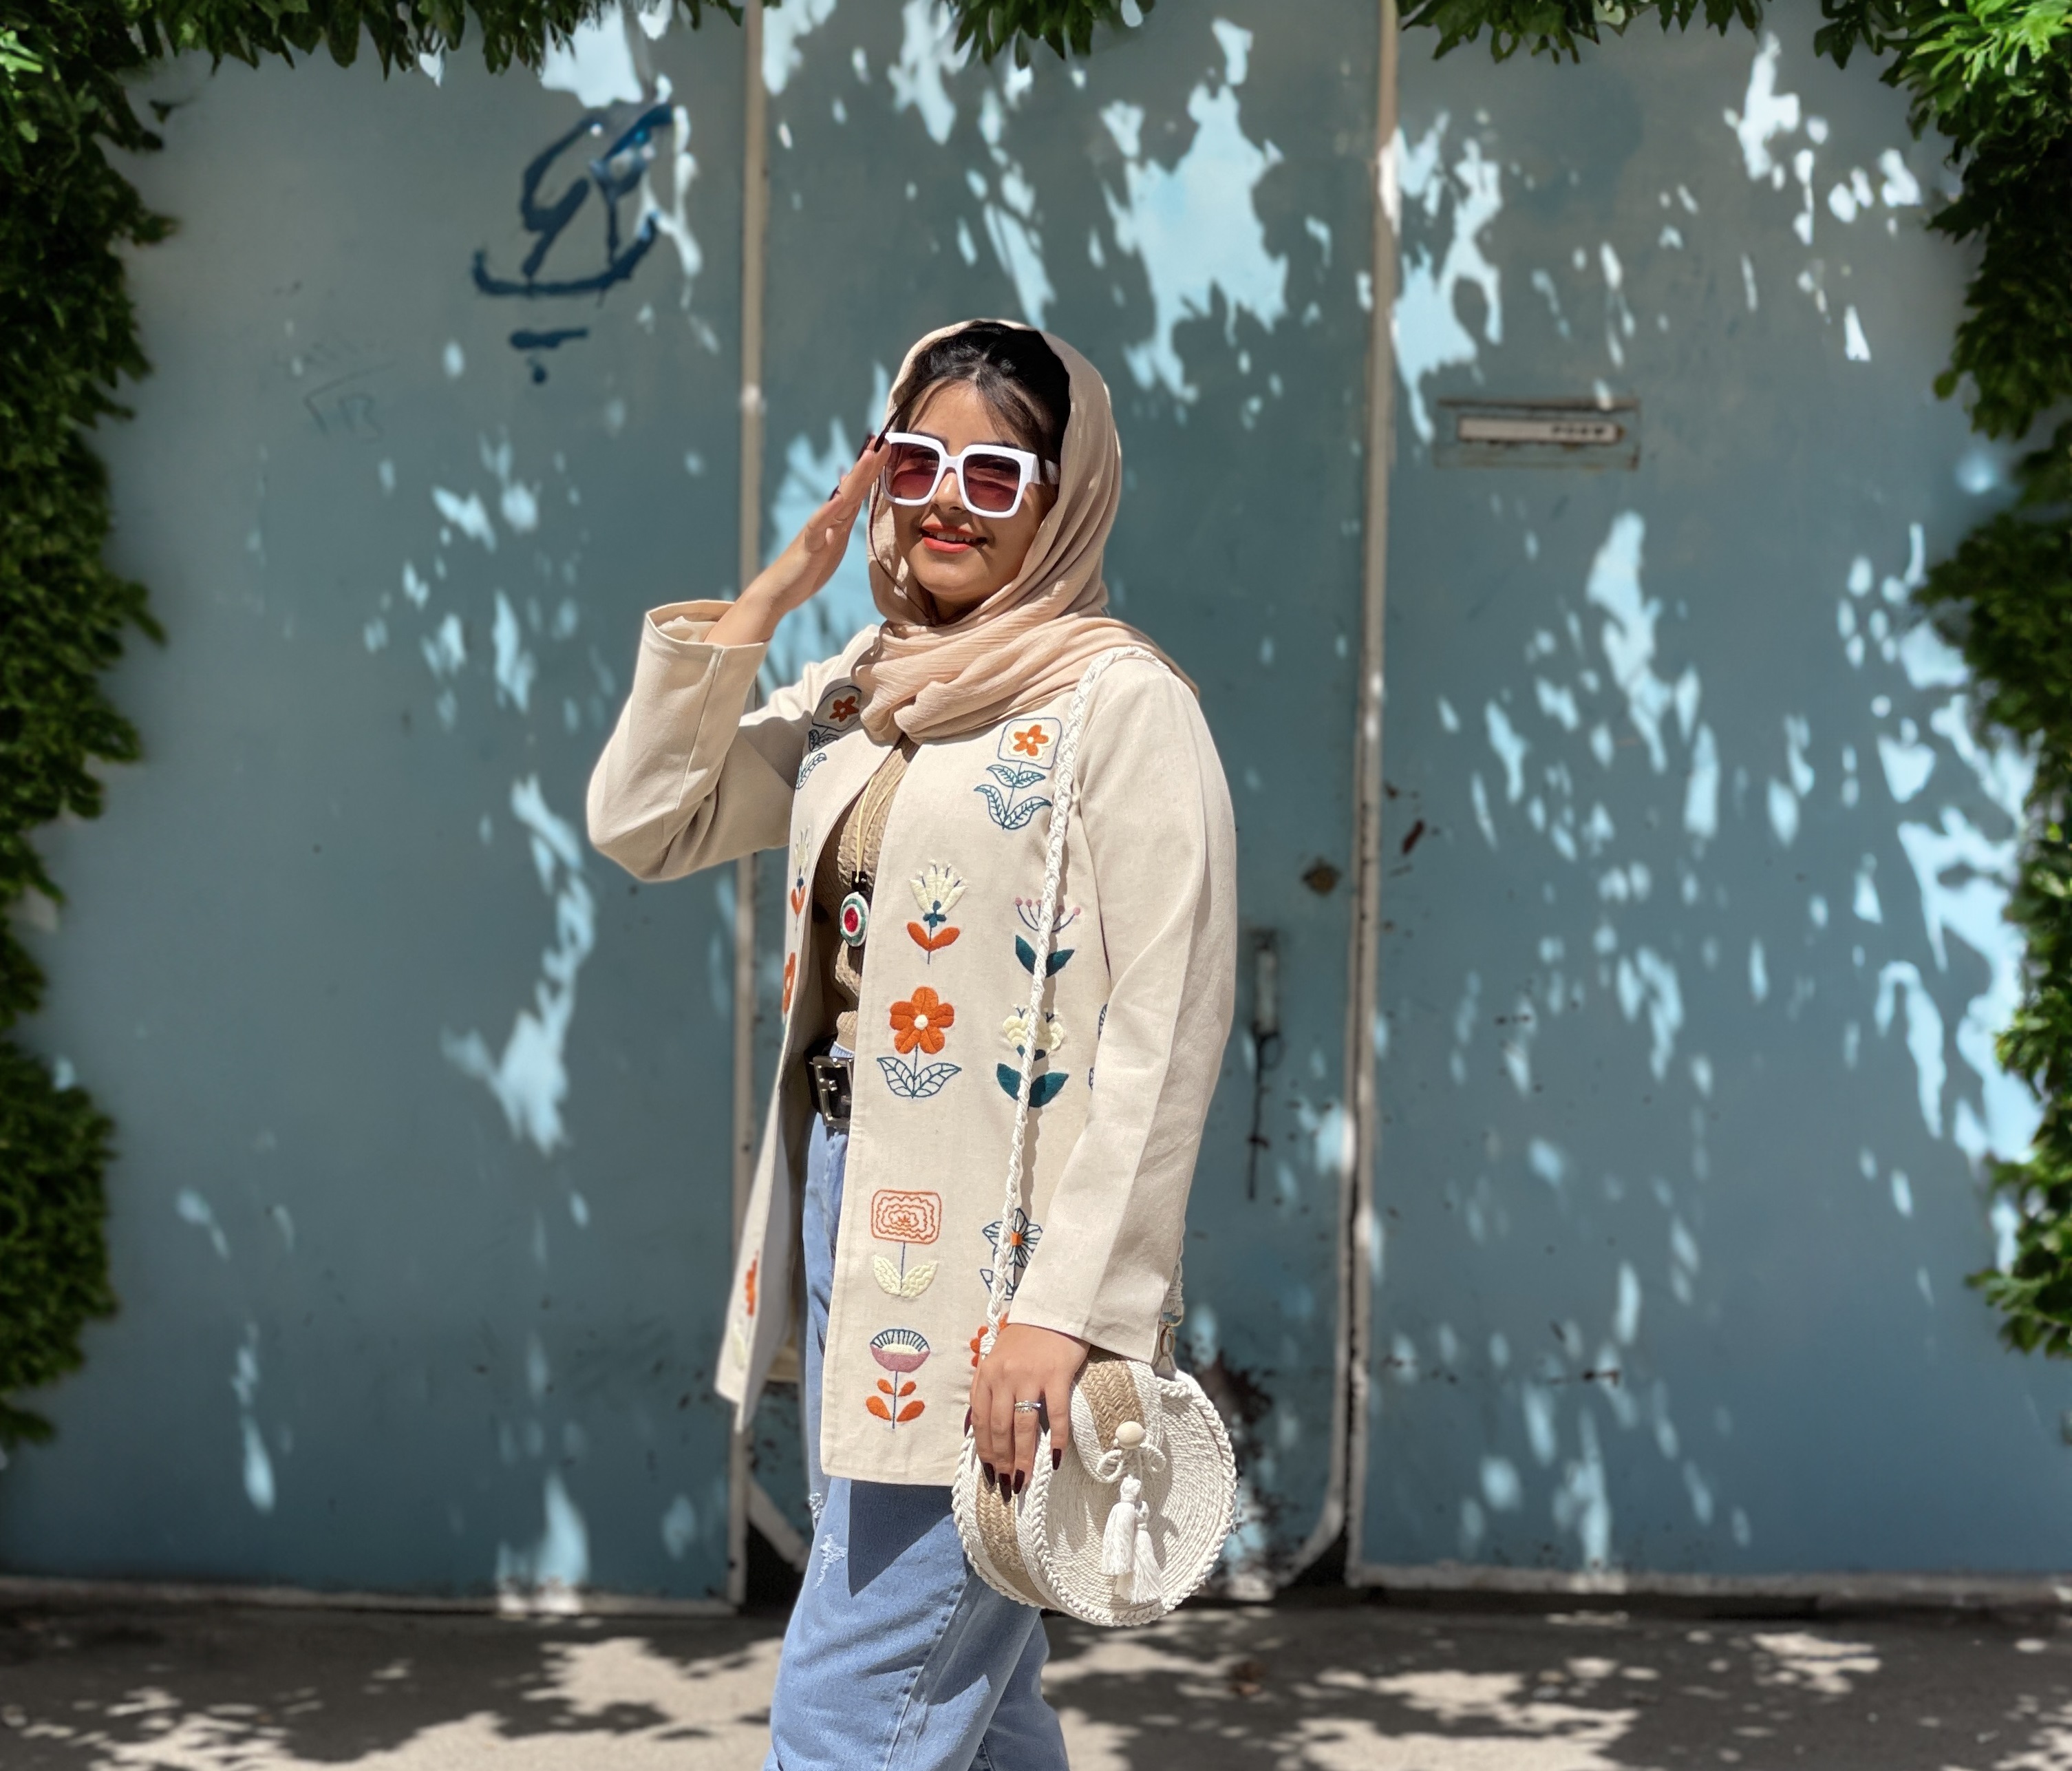 A young girl wearing a hand-embroidered blazer by DooziStyle in front of a blue door